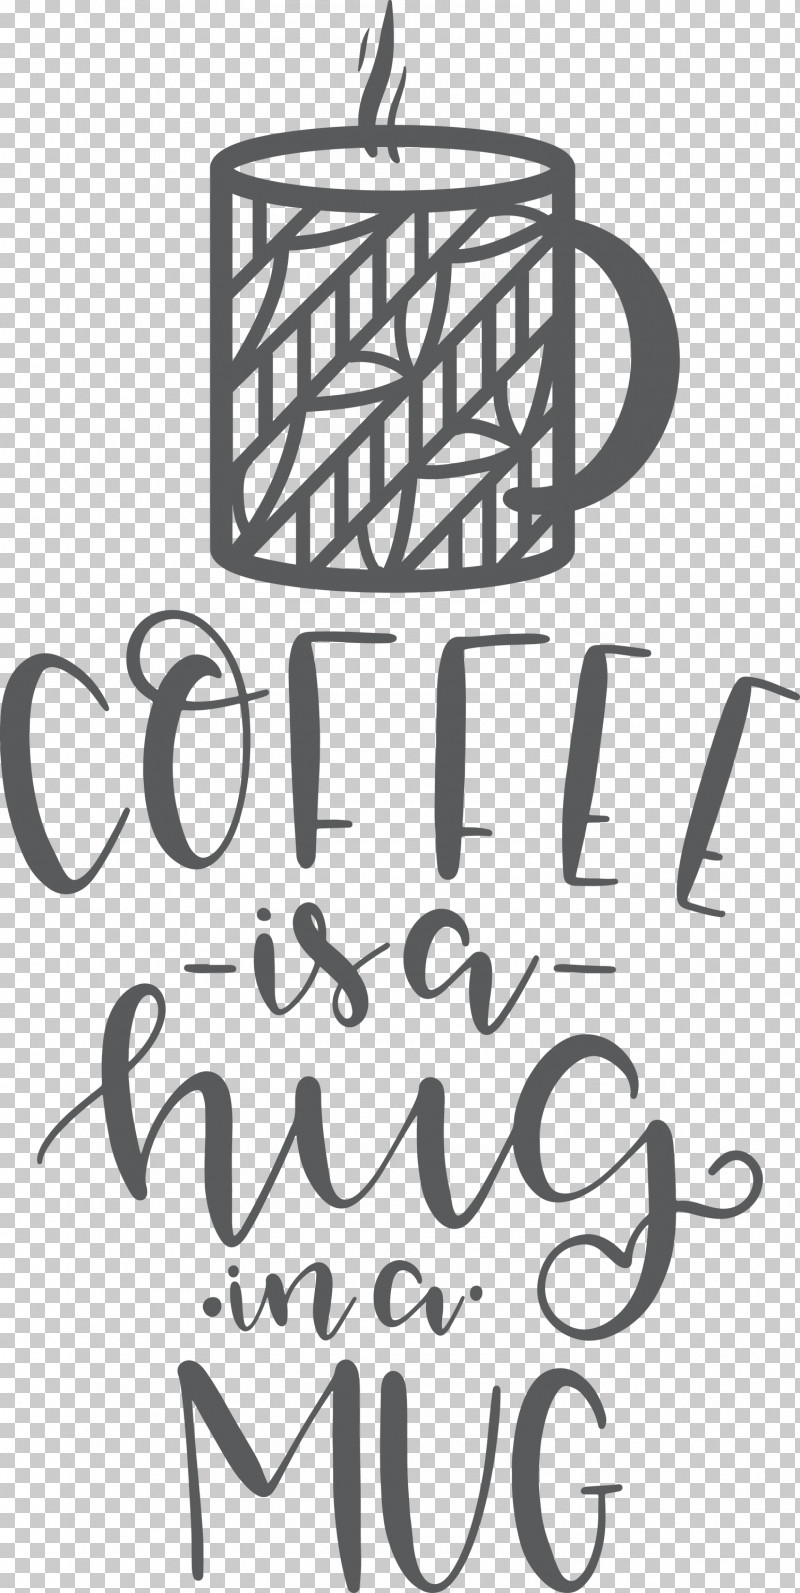 Coffee Is A Hug In A Mug Coffee PNG, Clipart, Cafe, Coffee, Coffee Bean Tea Leaf, Coffee Cup, Cup Free PNG Download